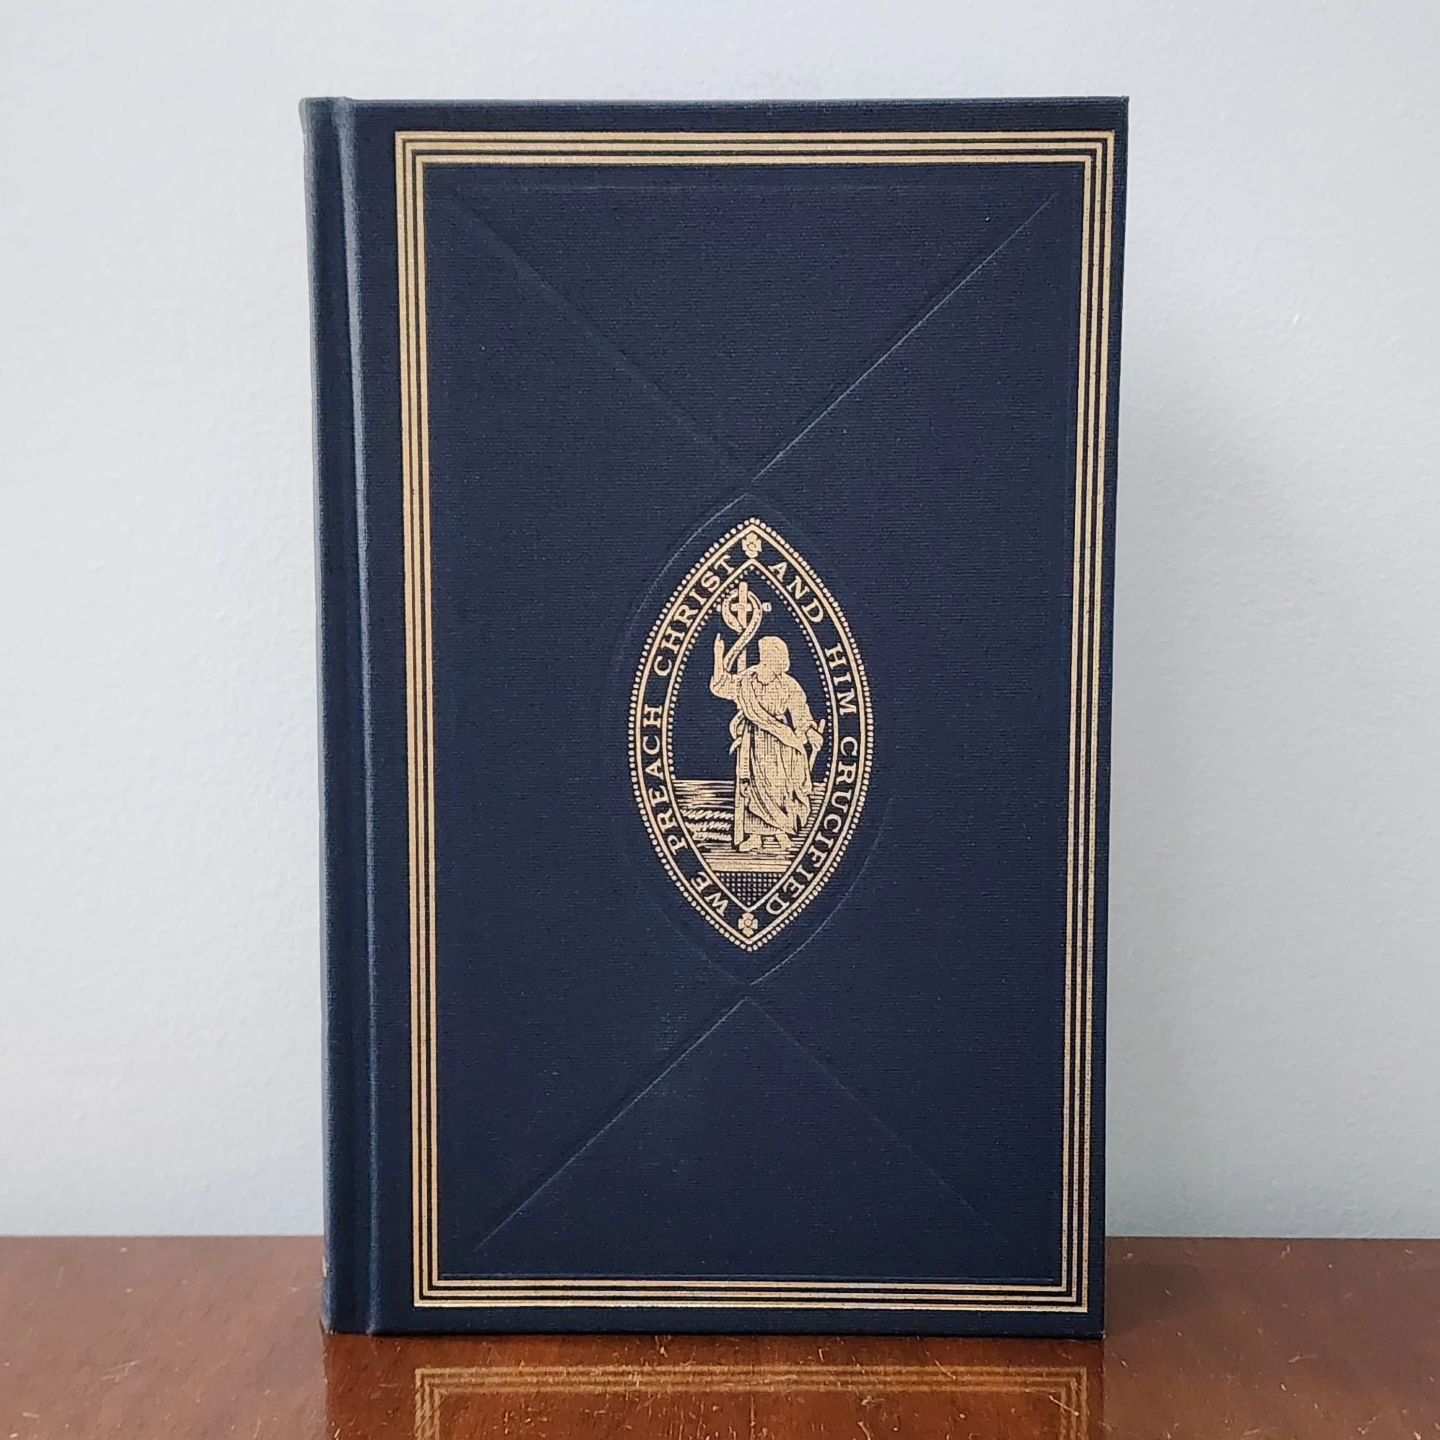 Limited navy editions of Spurgeon Sermons Vol. 1 are now available on the website.

50% of profit from these volumes will be going to support our church's pastoral school and mission work in Southern Africa. They are looking at a severe drought this 